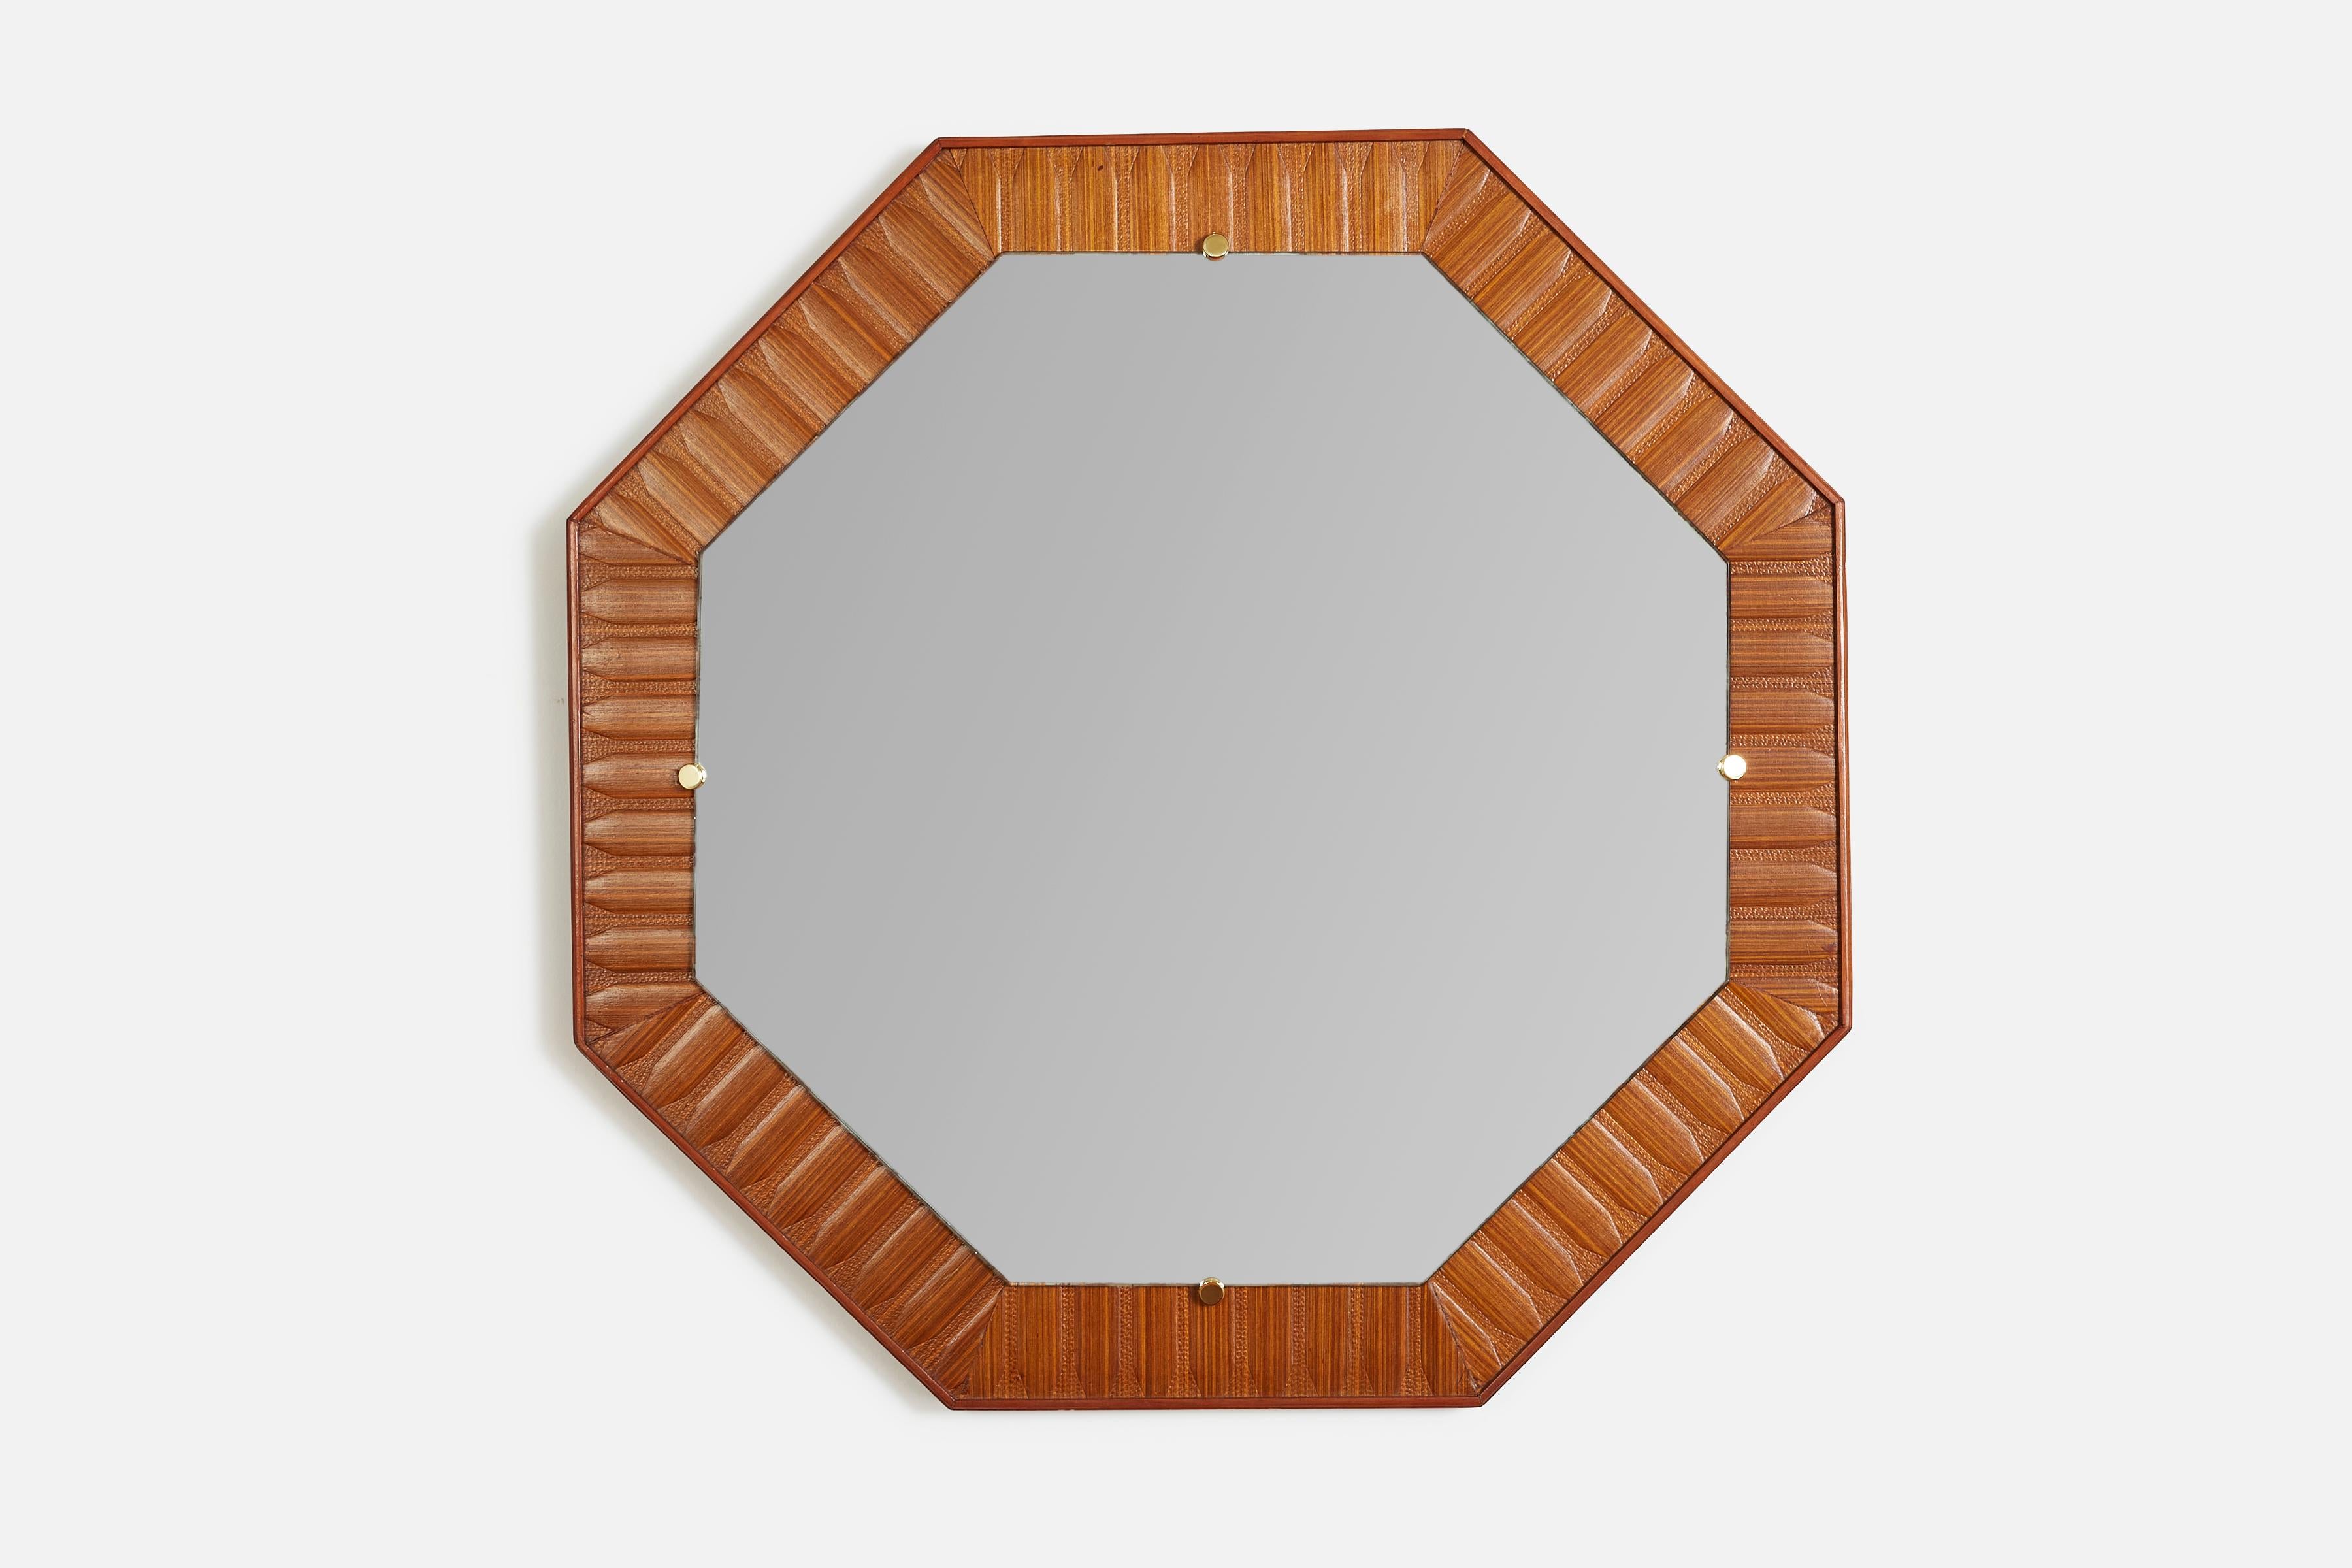 Unique Italian mirror with octagonal shape with wood inlay frame. 
Extremely well made with brass accents. 
Original patina.